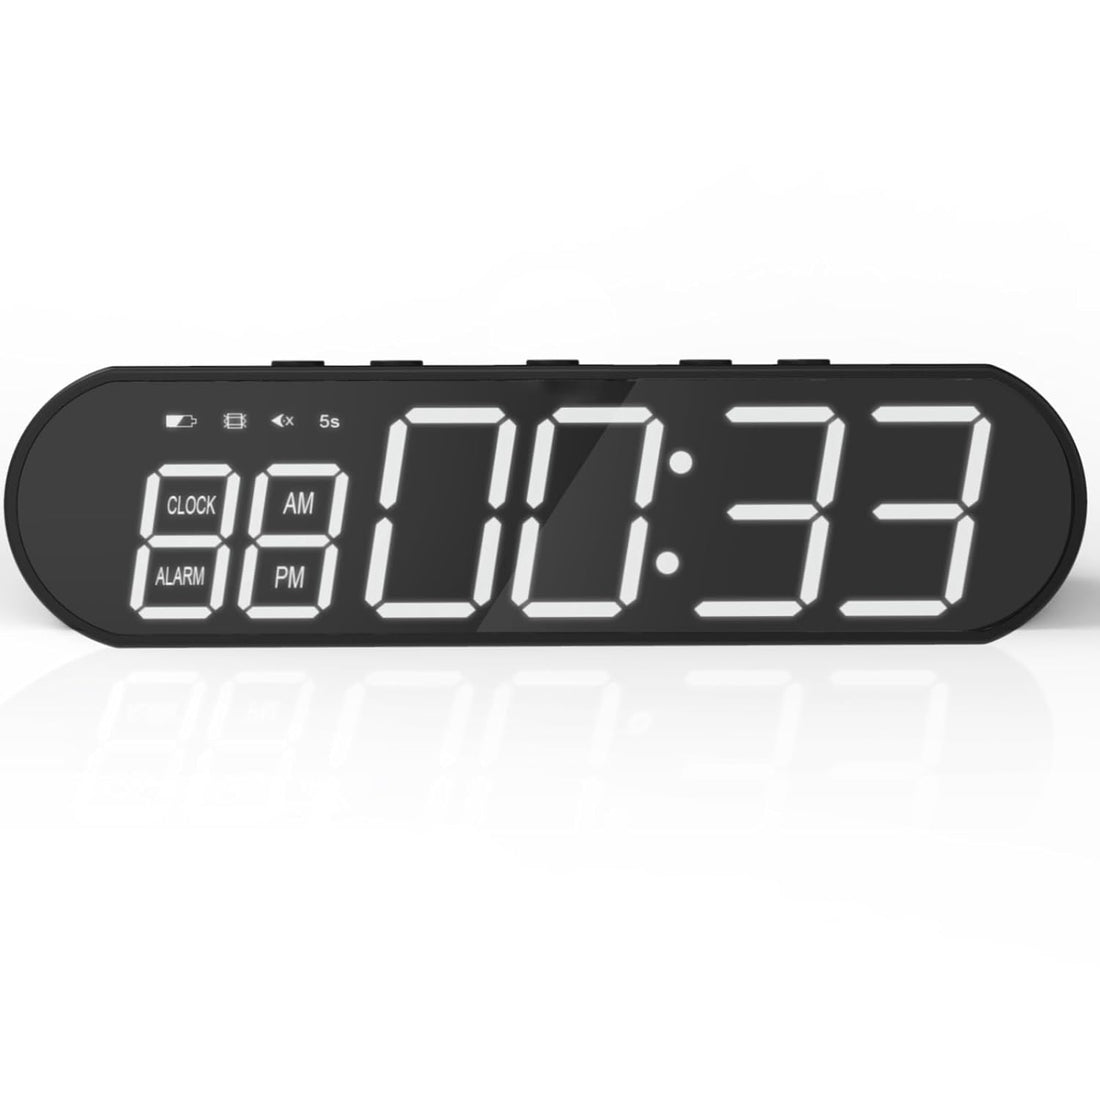 Kitchen Timer, 120DB Loud Digital Kitchen Timer, with Large LED Display, Count UP Countdown Magnetic Countup Timer for Cooking, Oven, Teaching, Seniors Classroom Study Teacher Kids, Fitness and Yoga